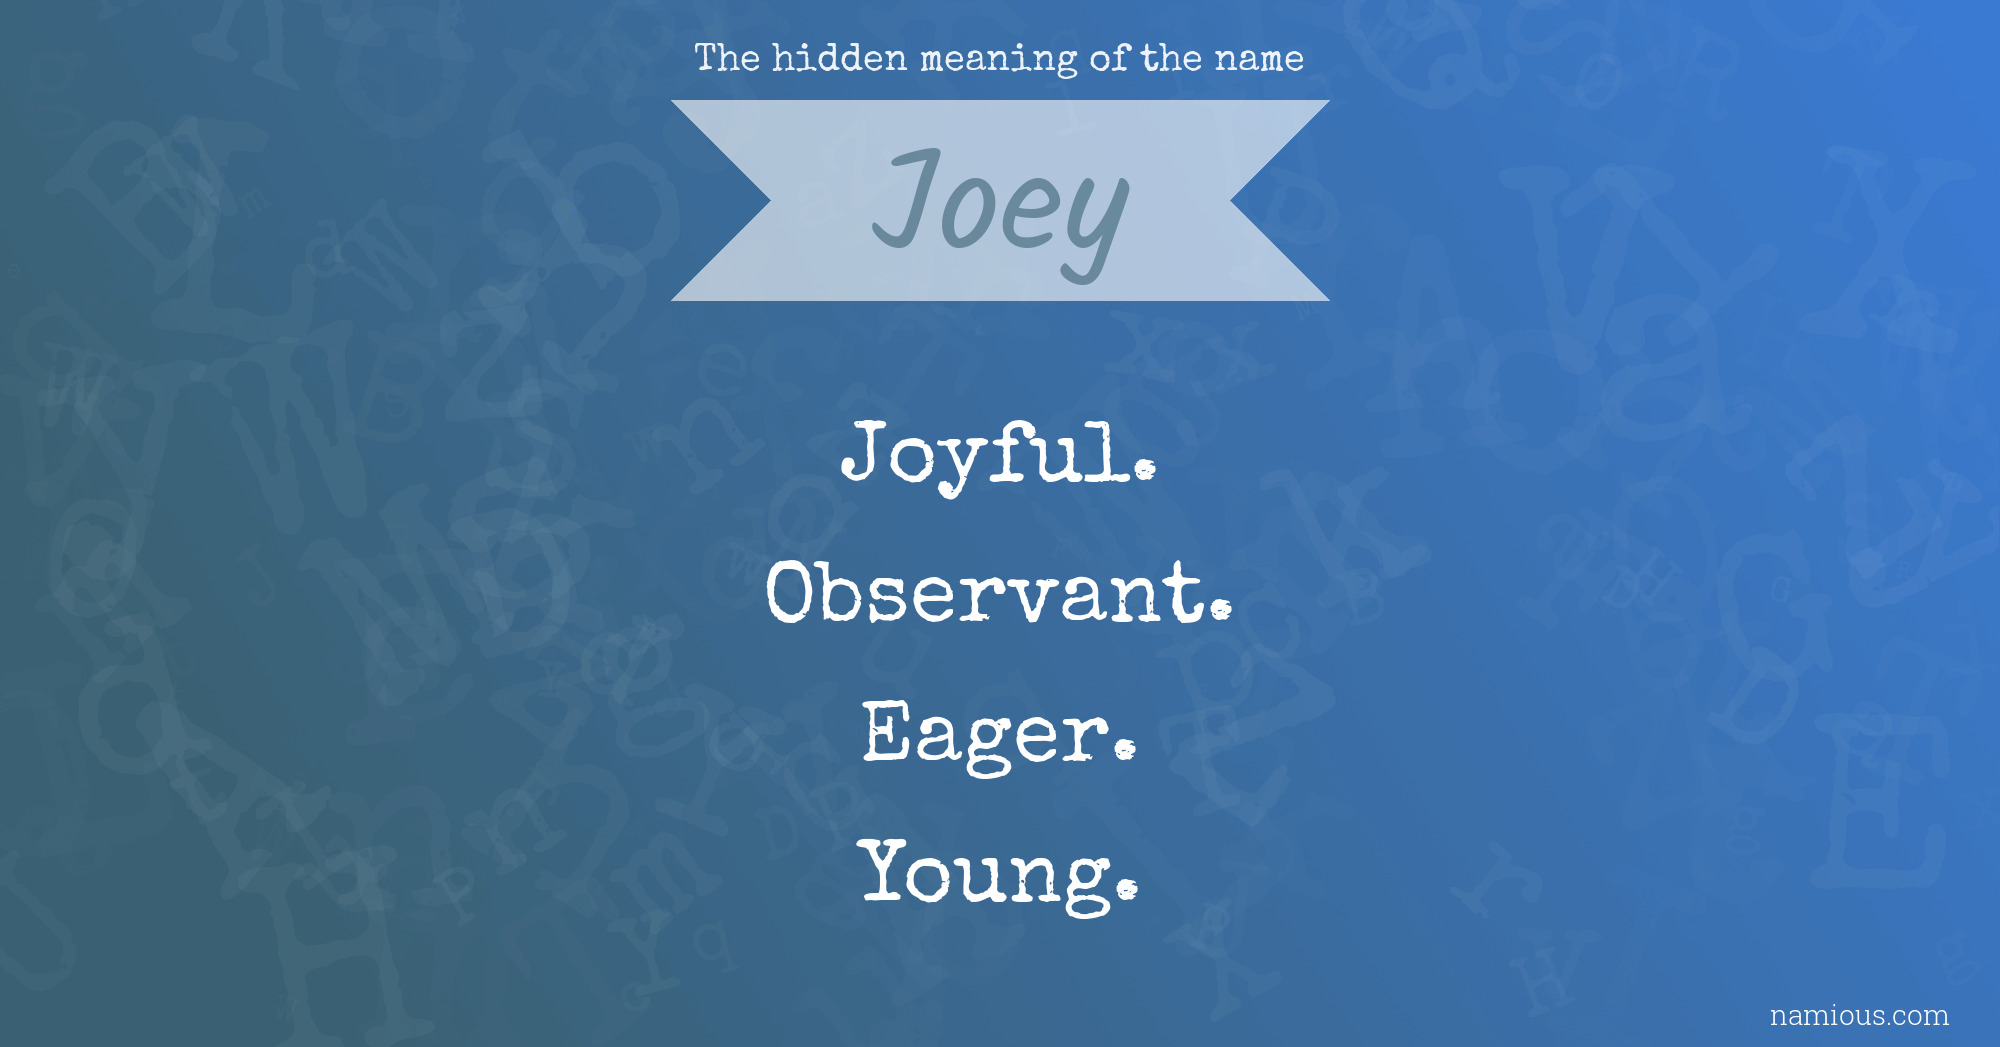 The hidden meaning of the name Joey